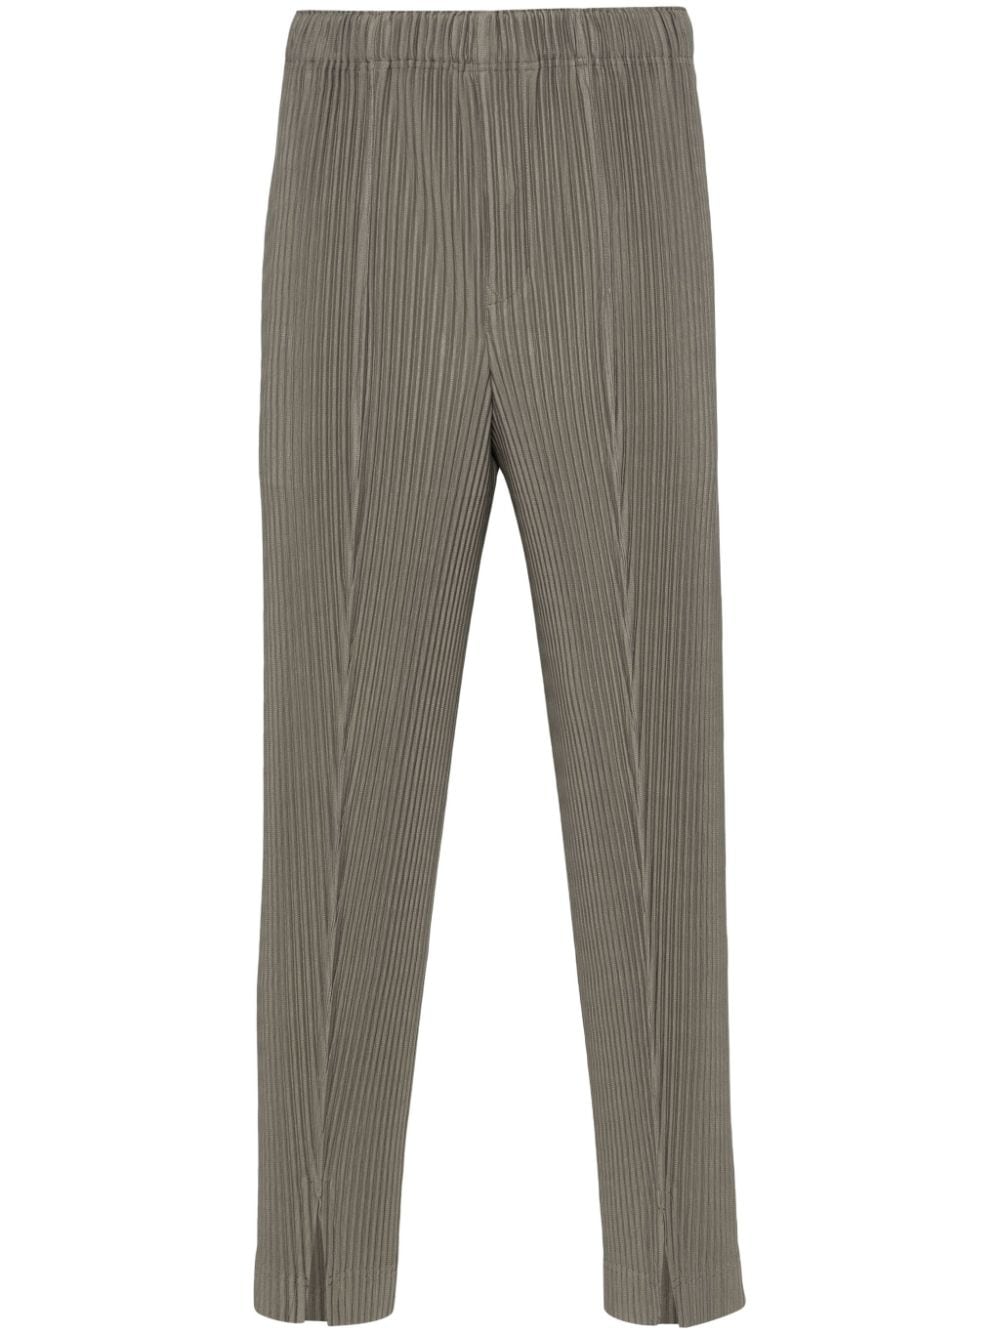 Homme Plissé Issey Miyake pleated tapered trousers - Green von Homme Plissé Issey Miyake